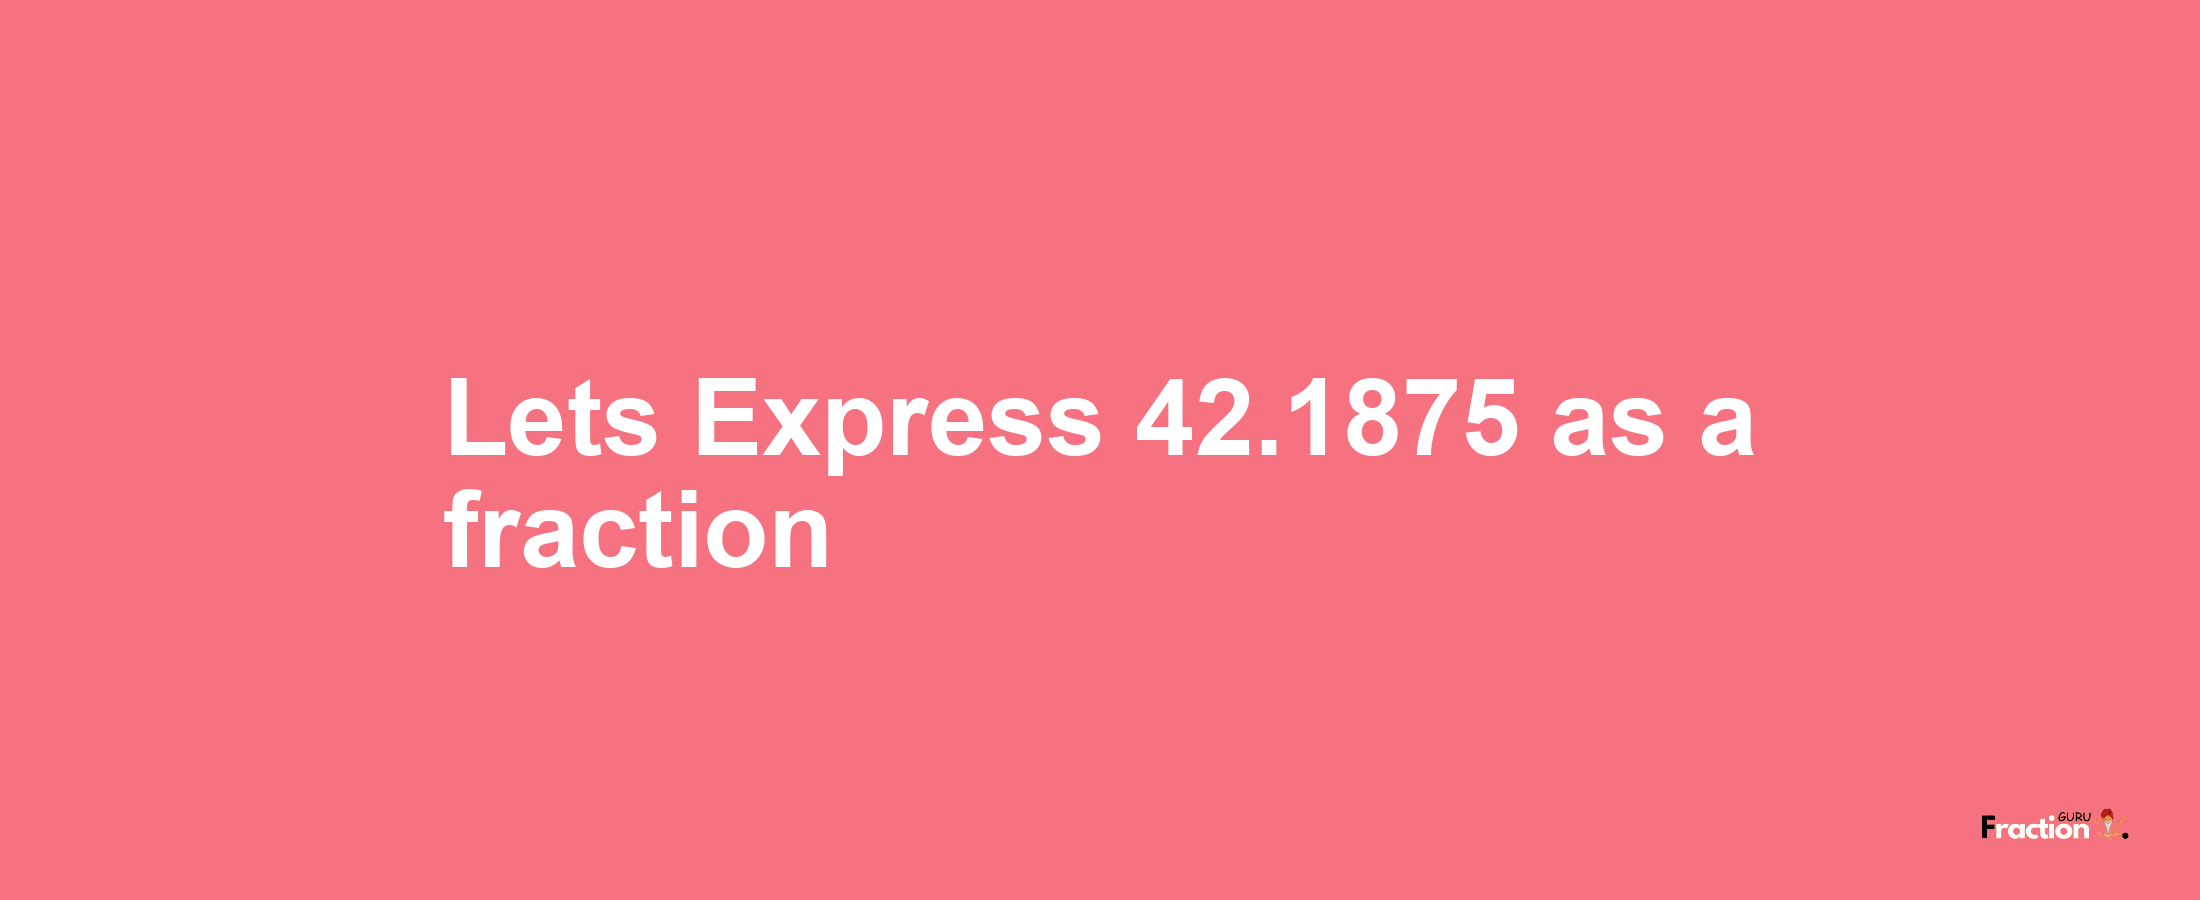 Lets Express 42.1875 as afraction